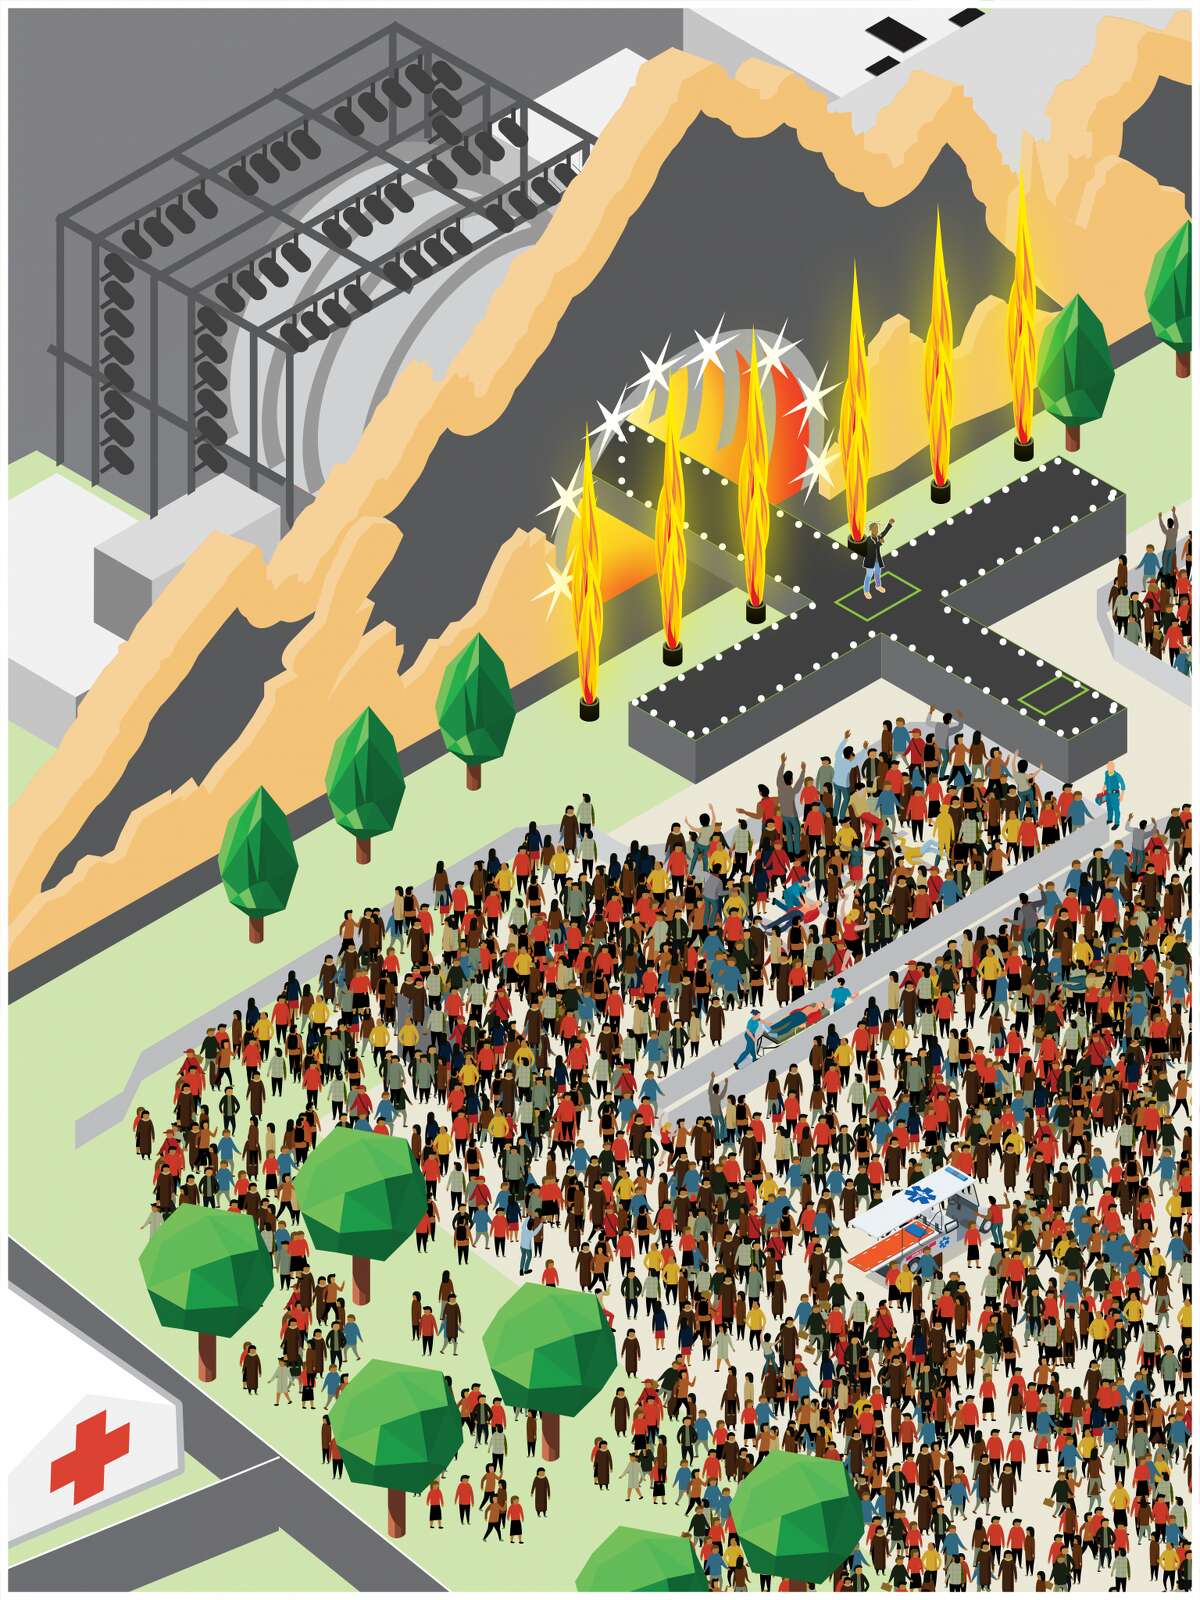 Illustration of crowd, Scott, paramedics and medical cart in crowd.